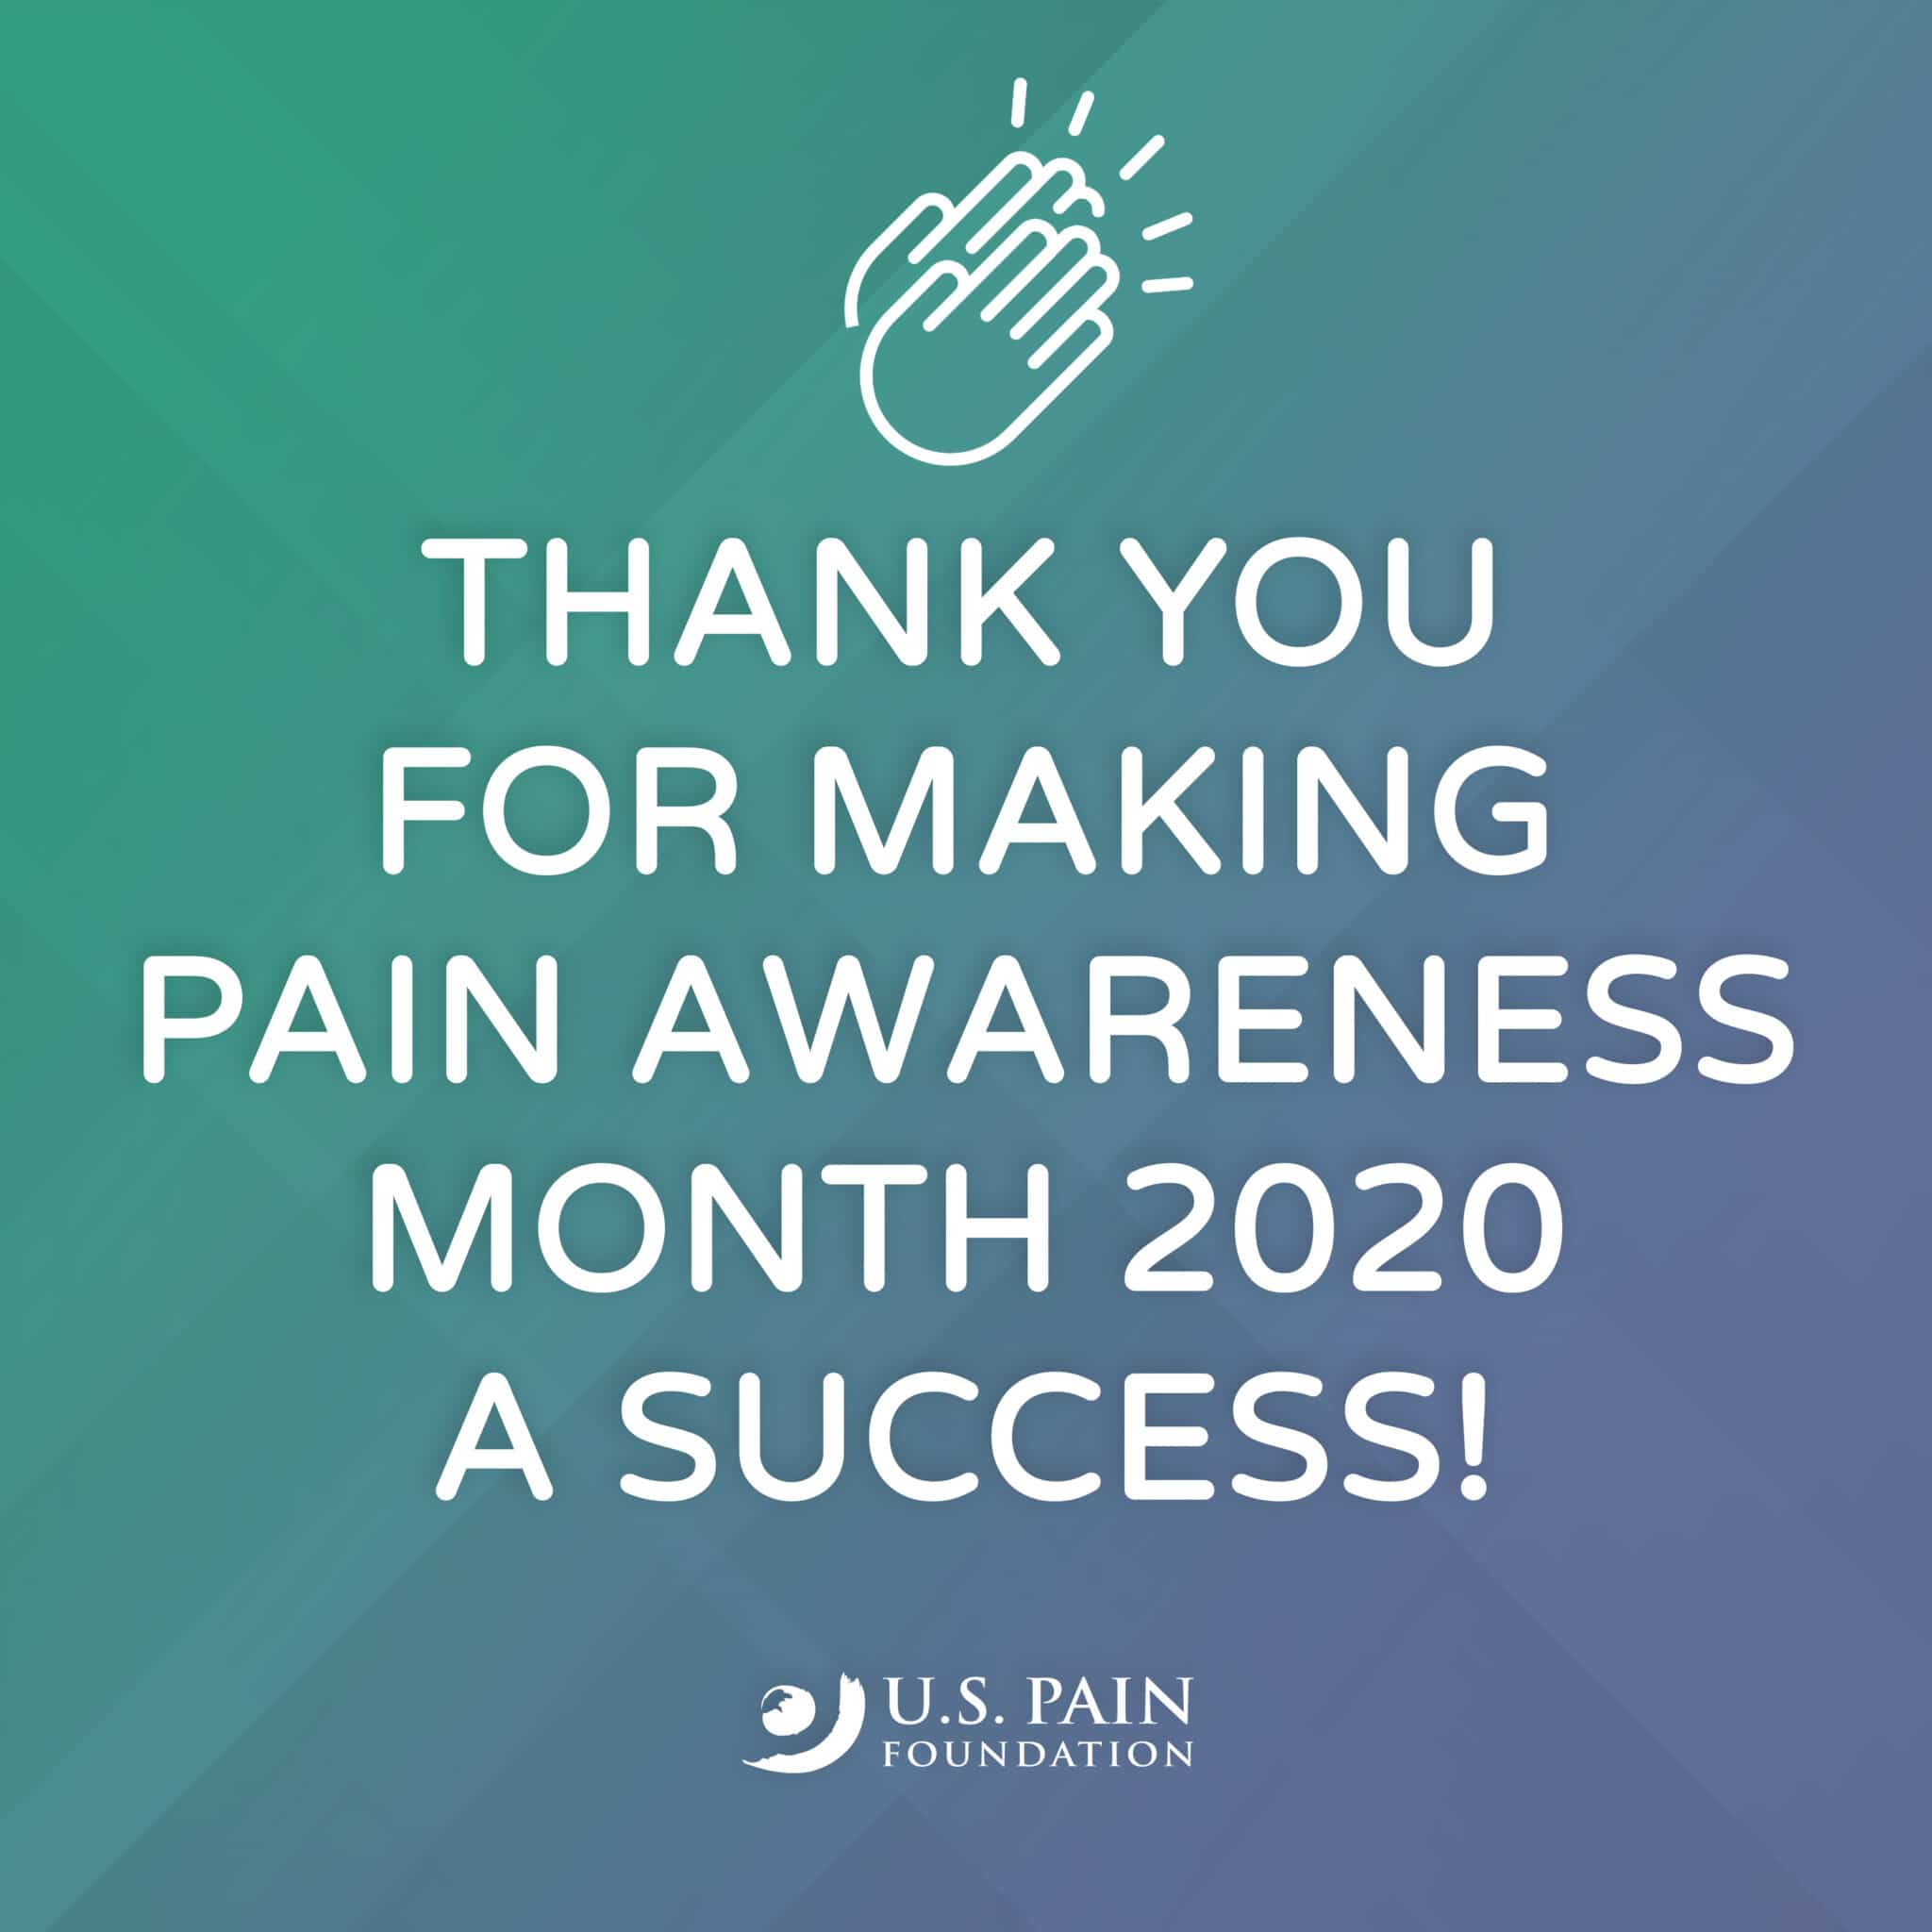 The need for improved care continues long after Pain Awareness Month